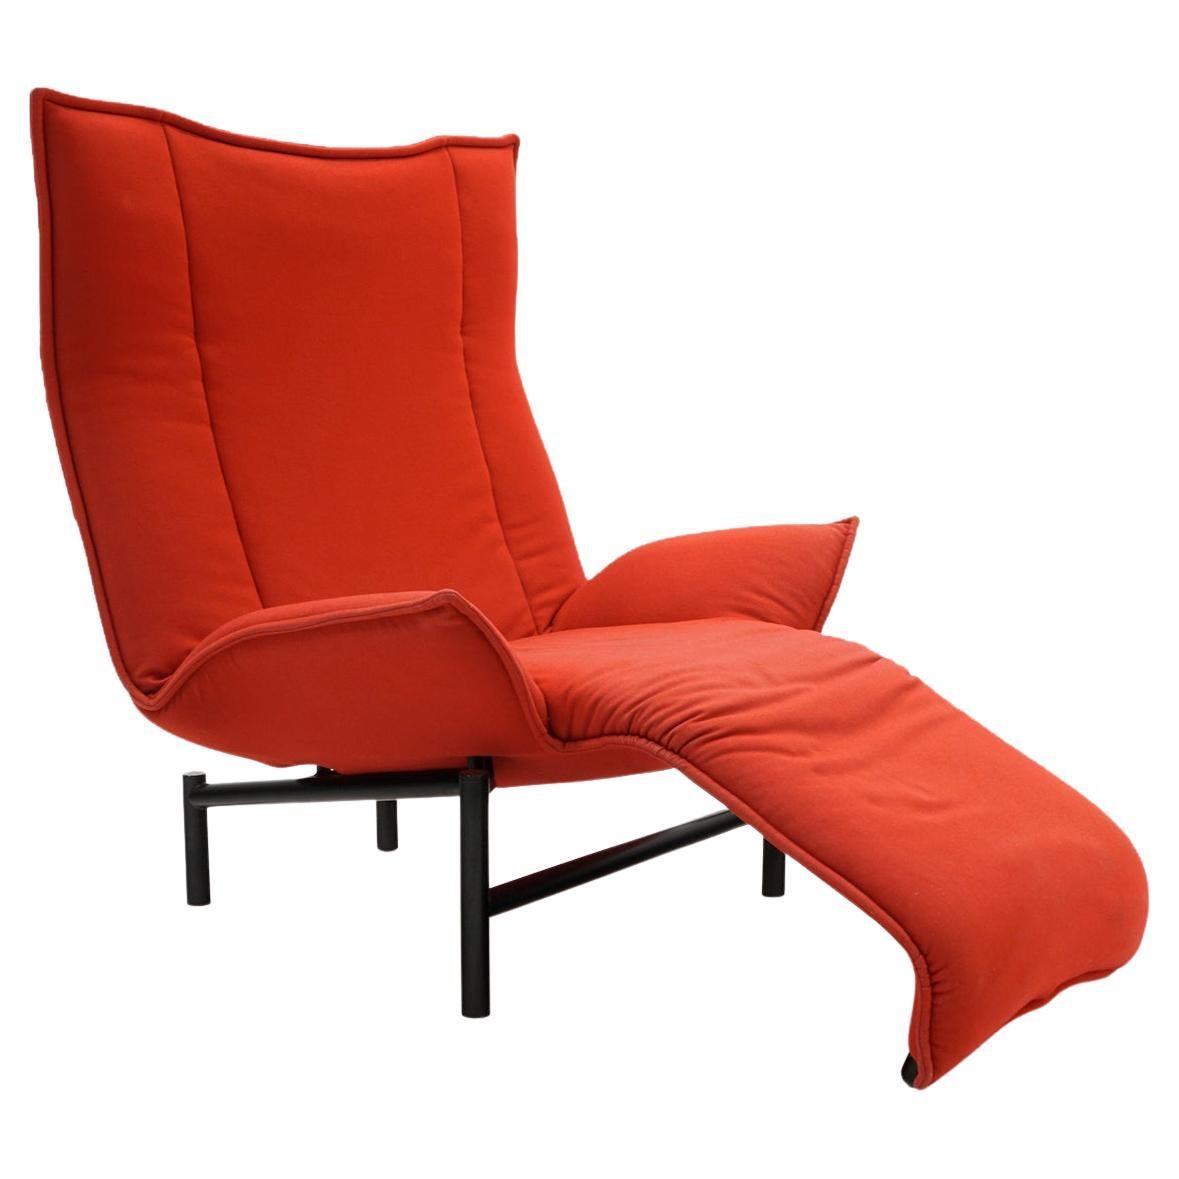 Reclining Veranda Lounge Chair by Vico Magistretti for Cassina, Red, Black Frame For Sale